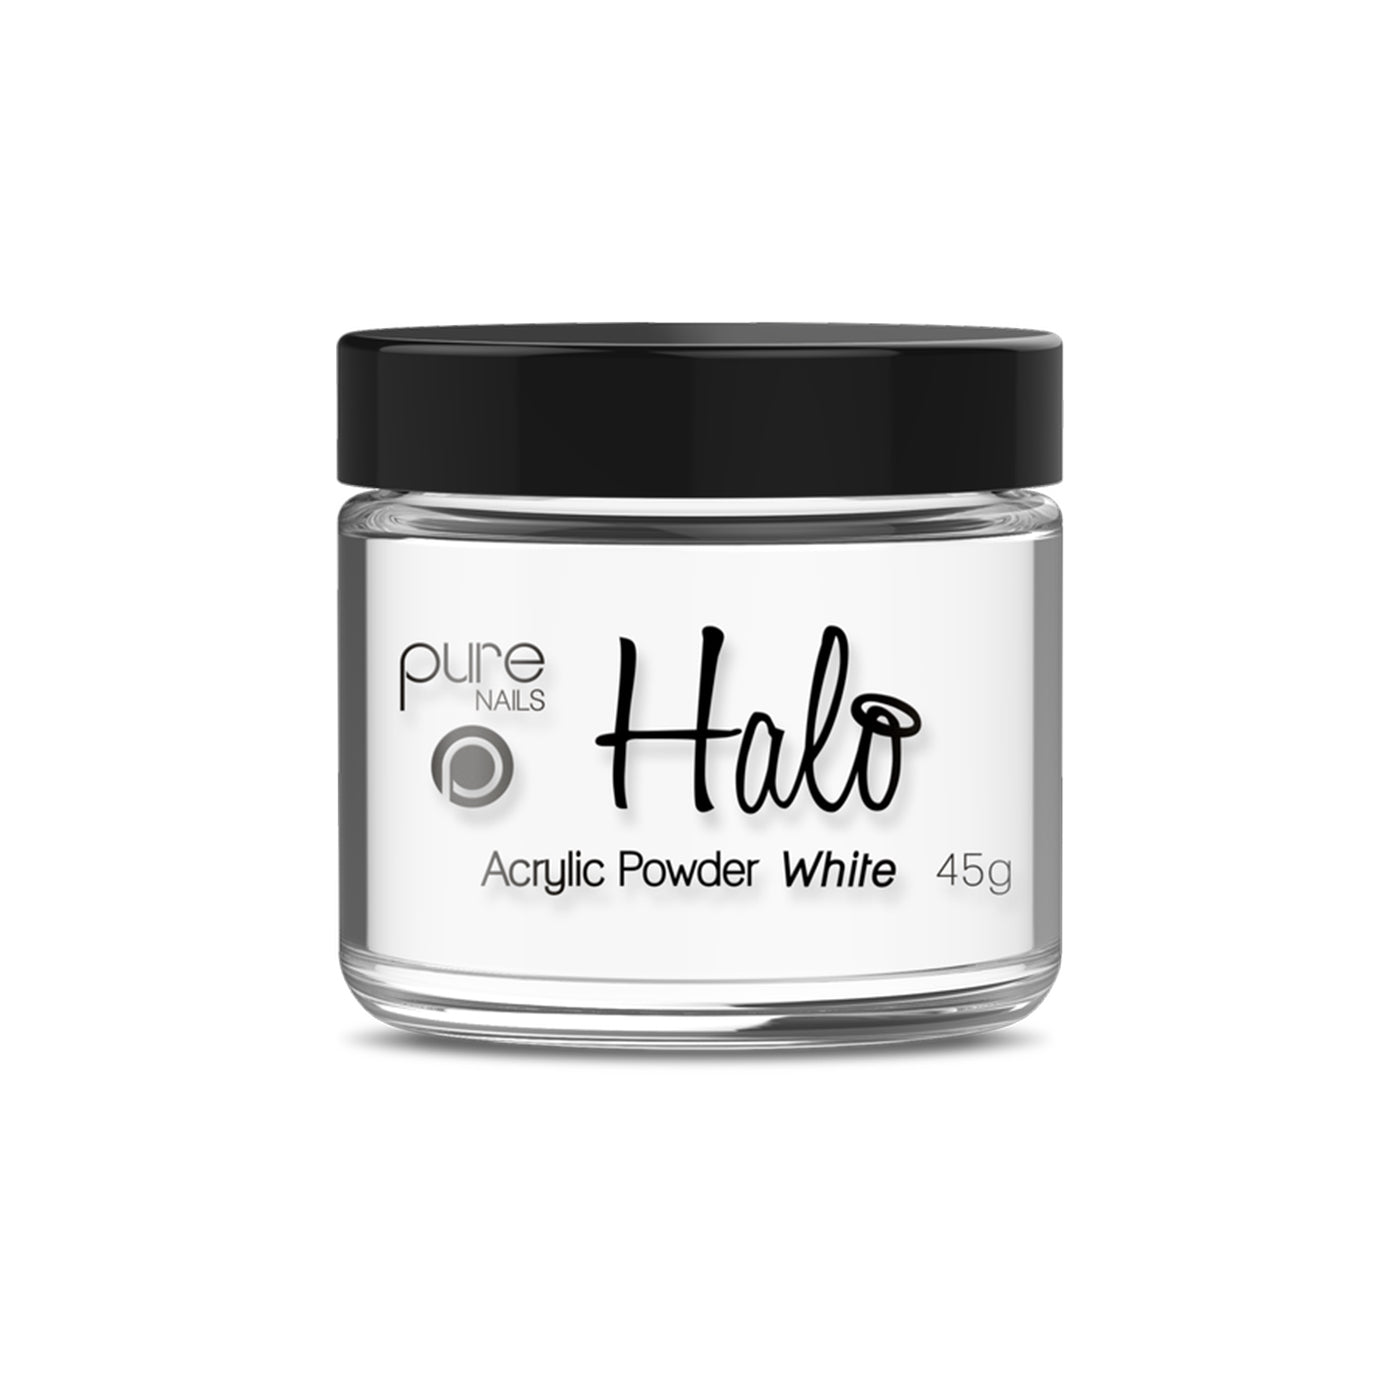 Halo Acrylic Powder - White (45g) - Ultimate Hair and Beauty